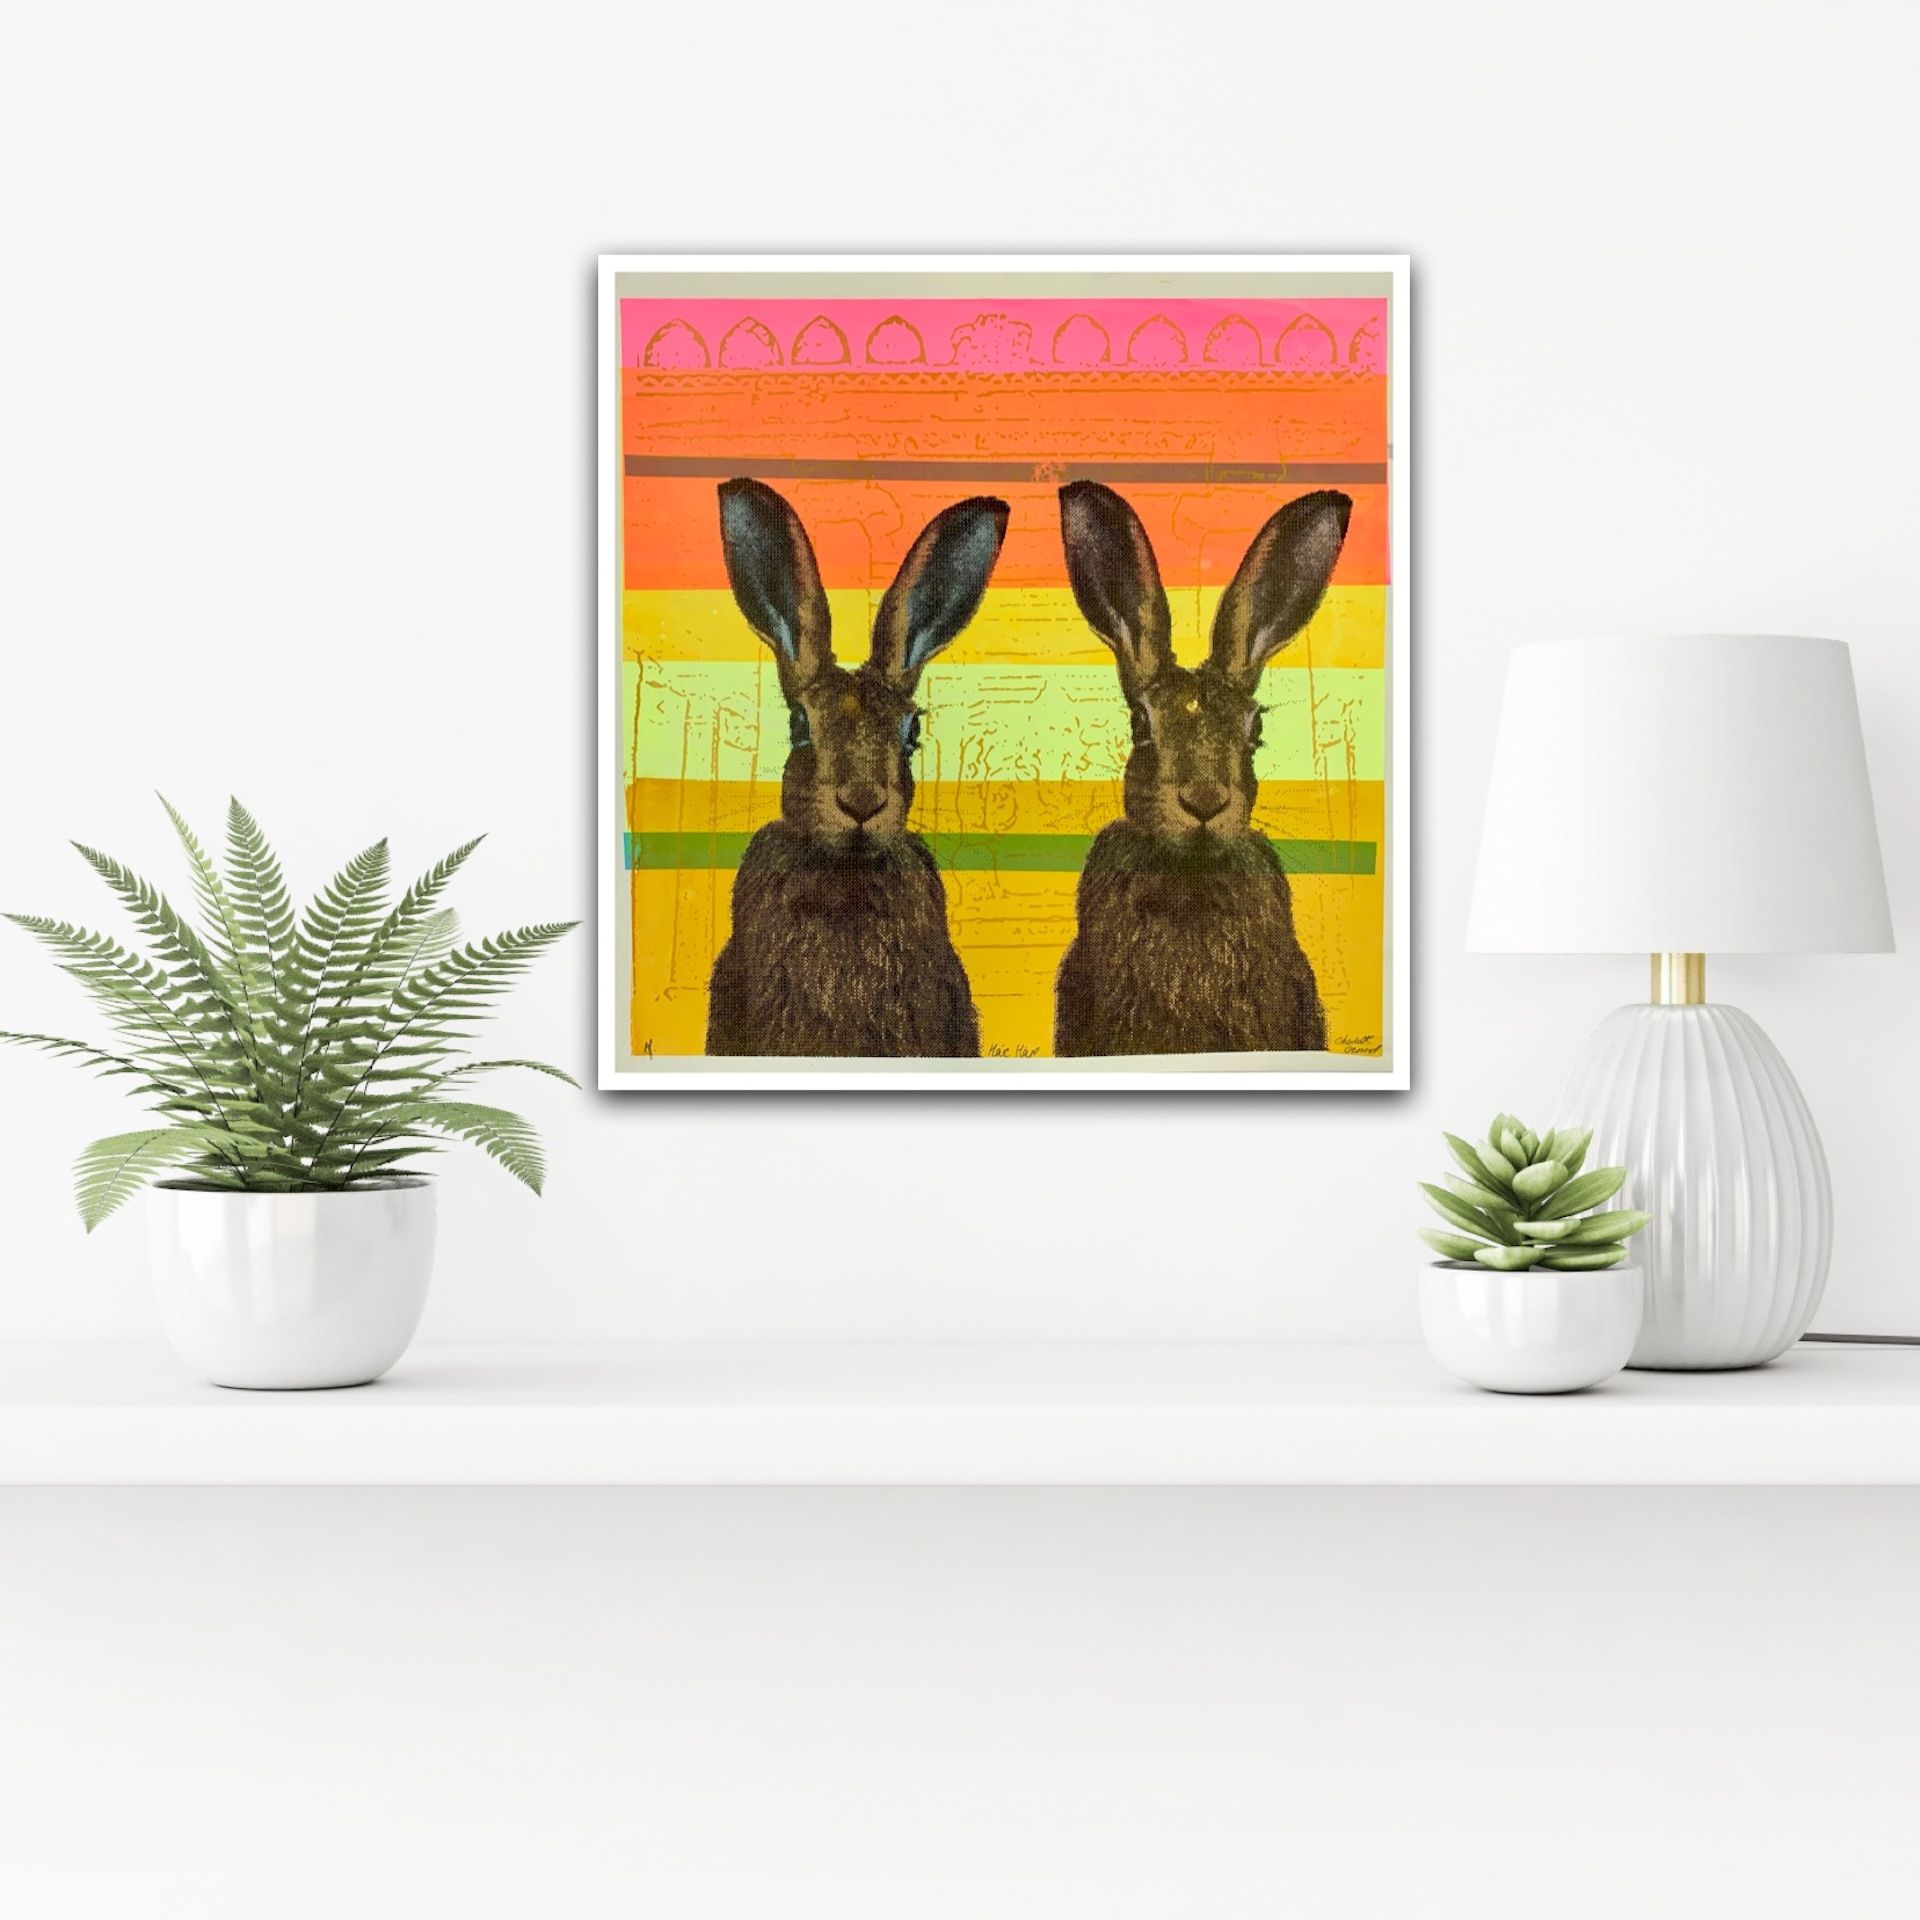 Hare Hare by Charlotte Gerrard - Secondary Image